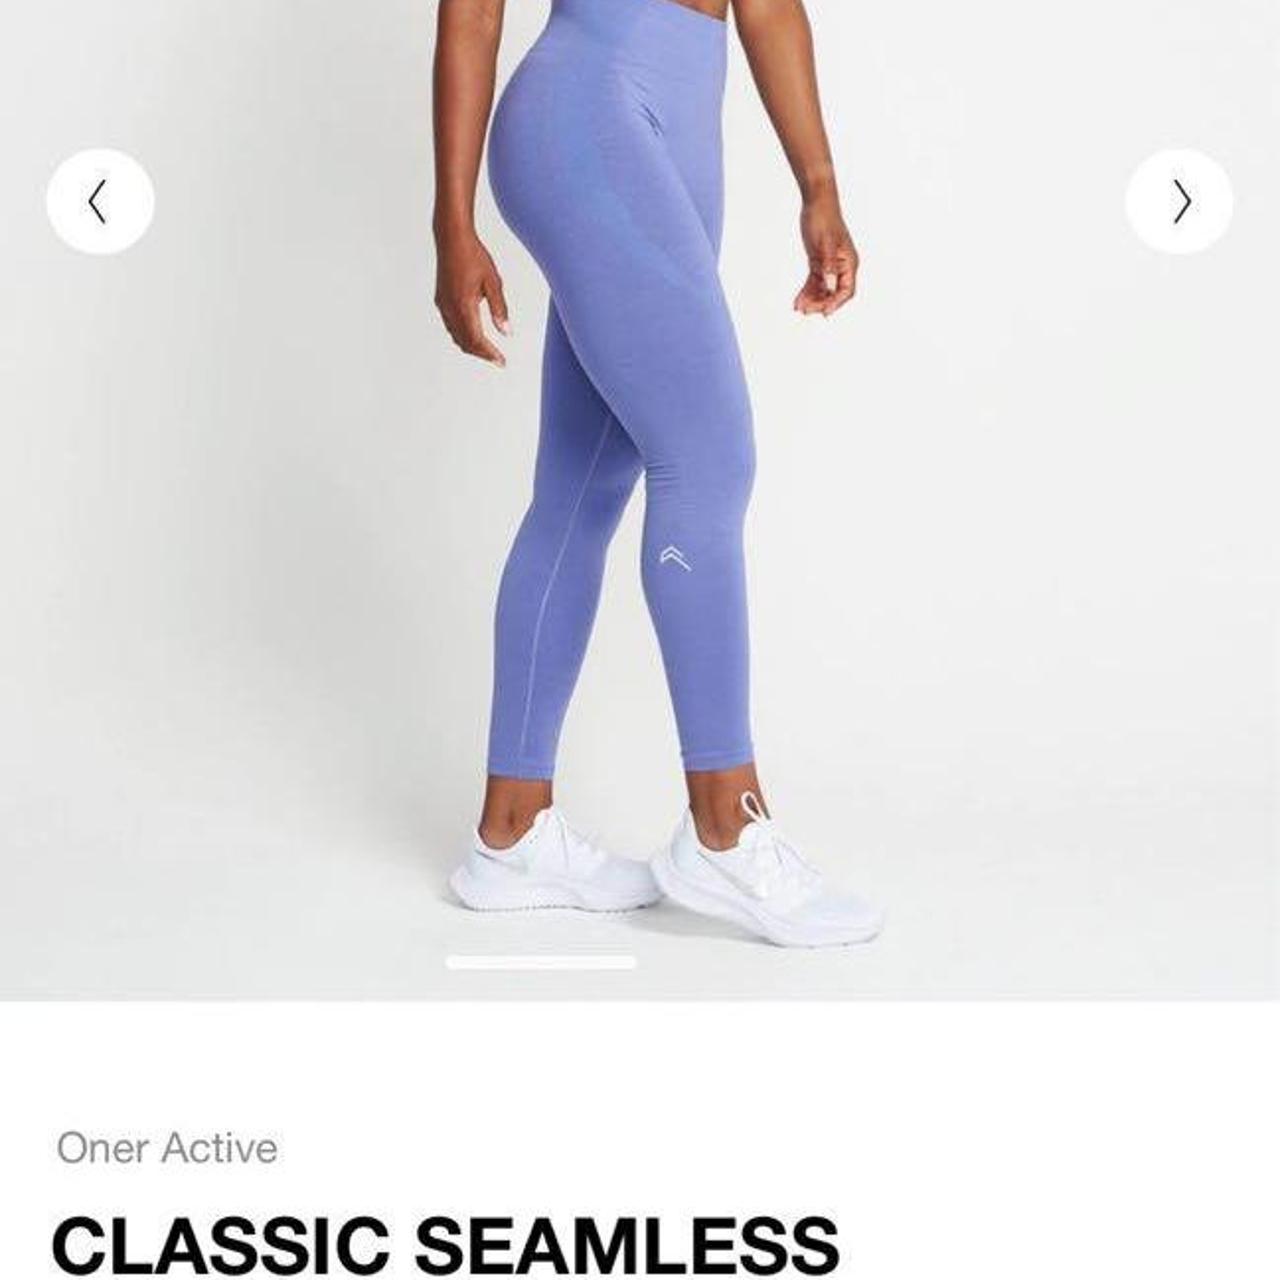 Seamless Oner Active Leggings , Material is thick